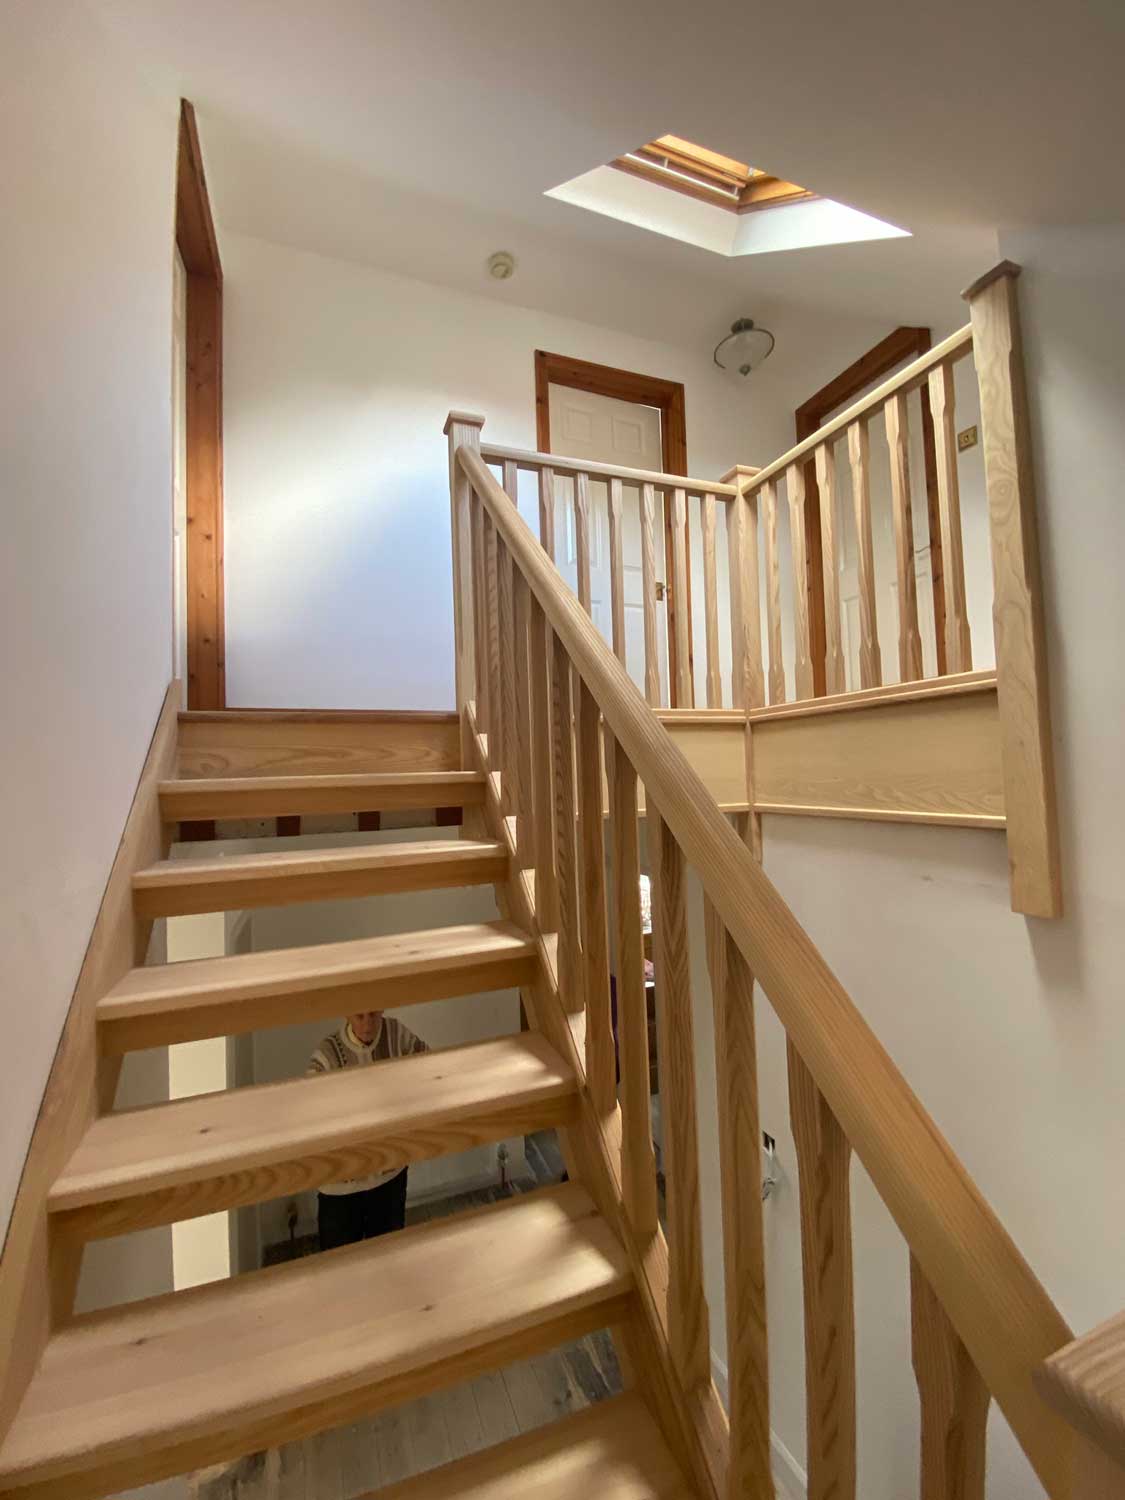 Contemporary Open Riser staircase with wooden balusters